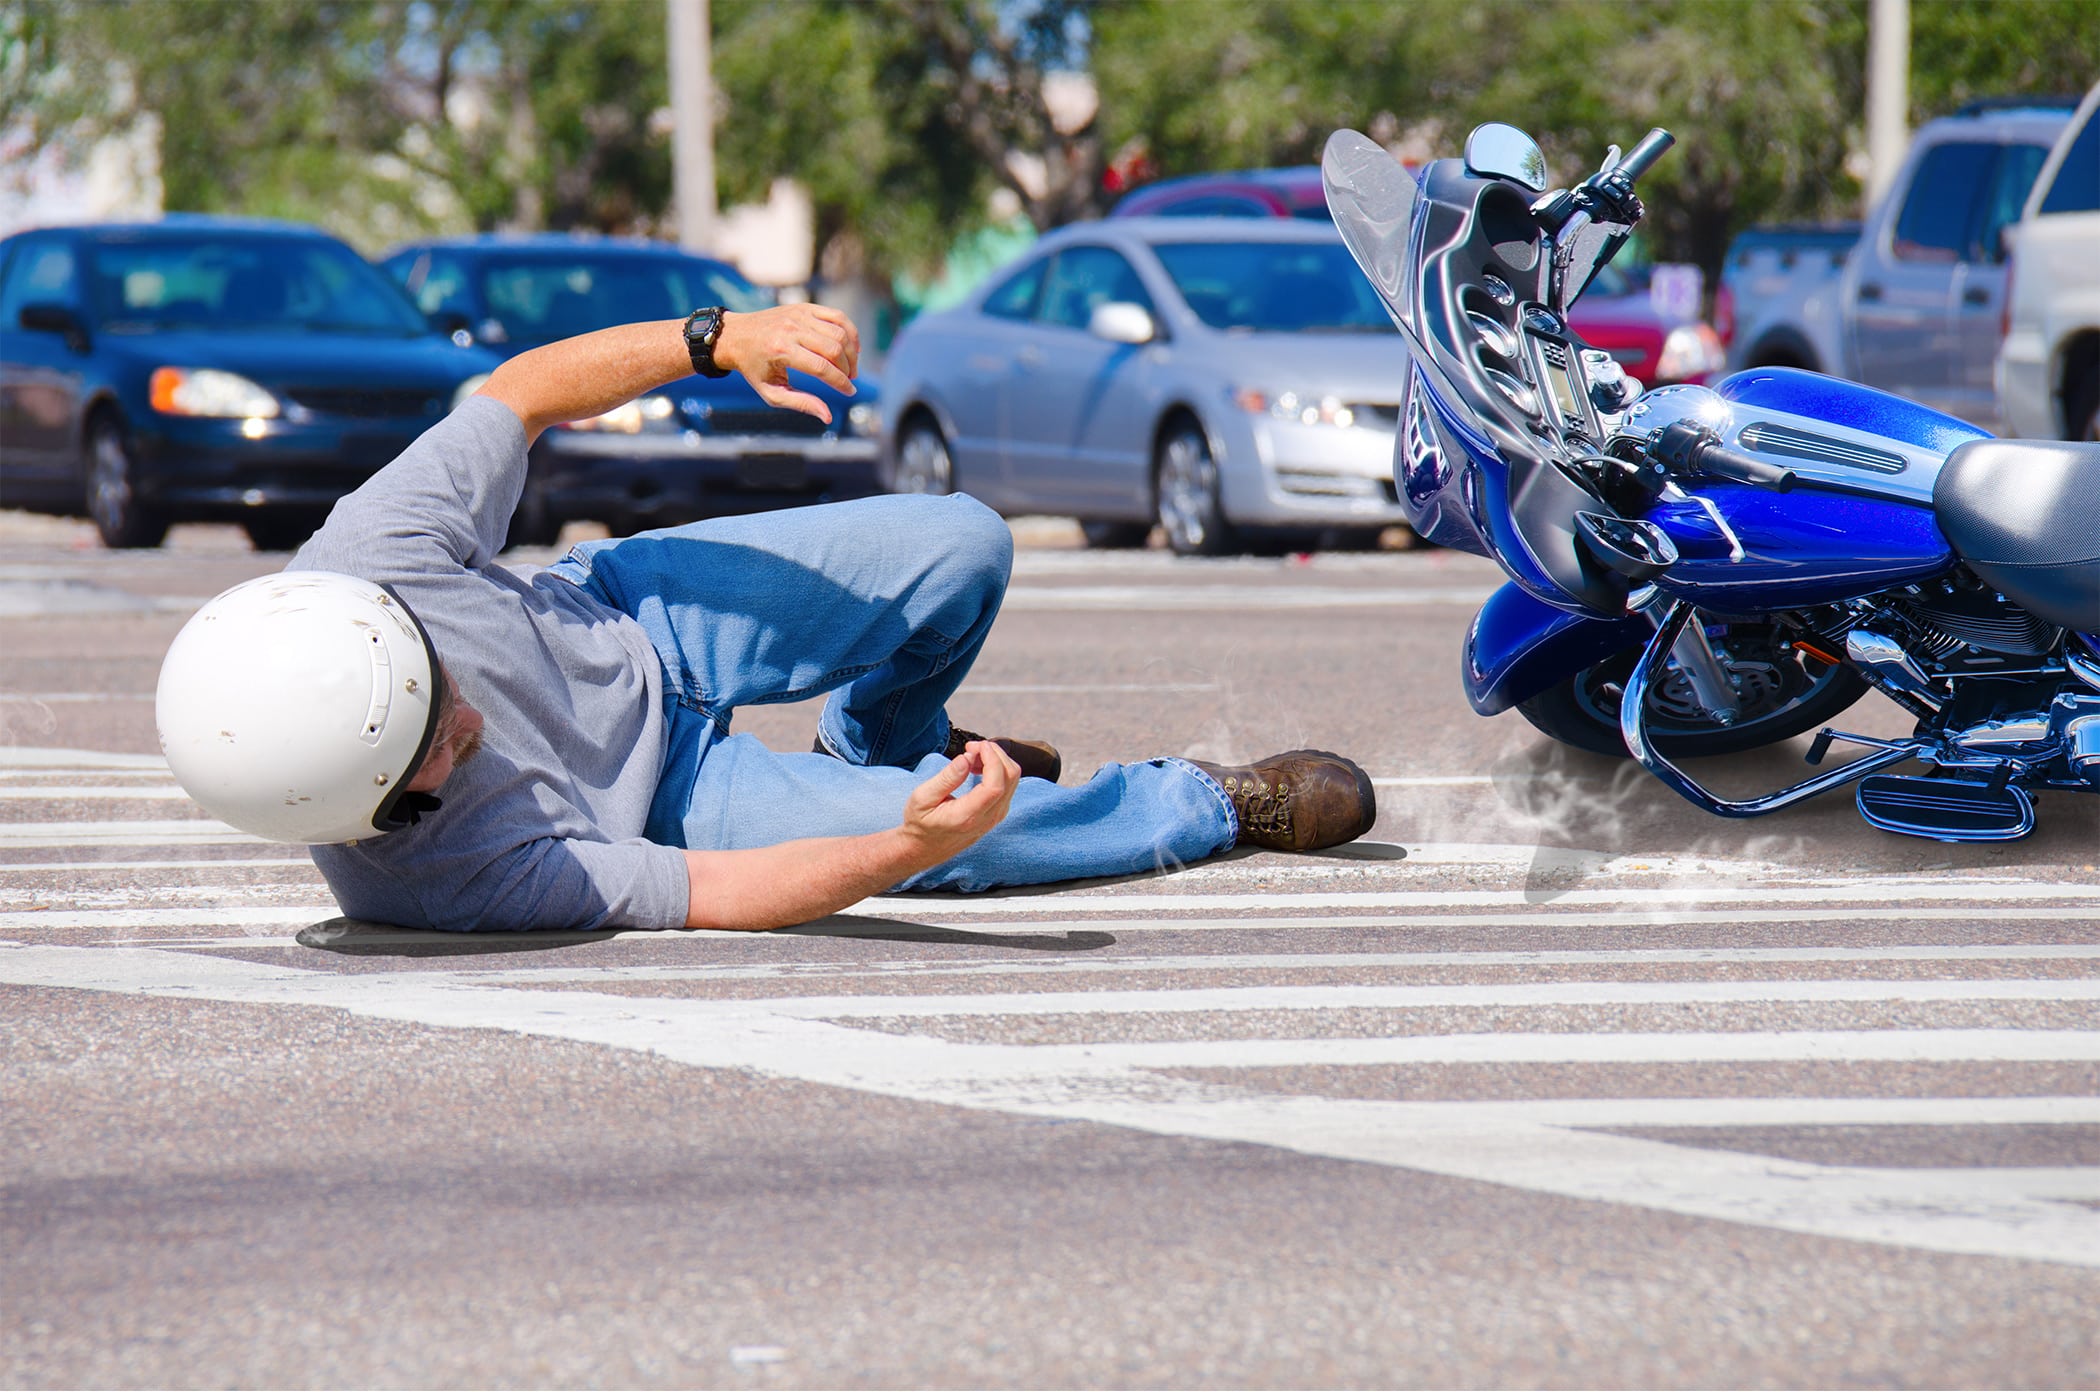 The best mortorcycle accident lawyers in North Carolin